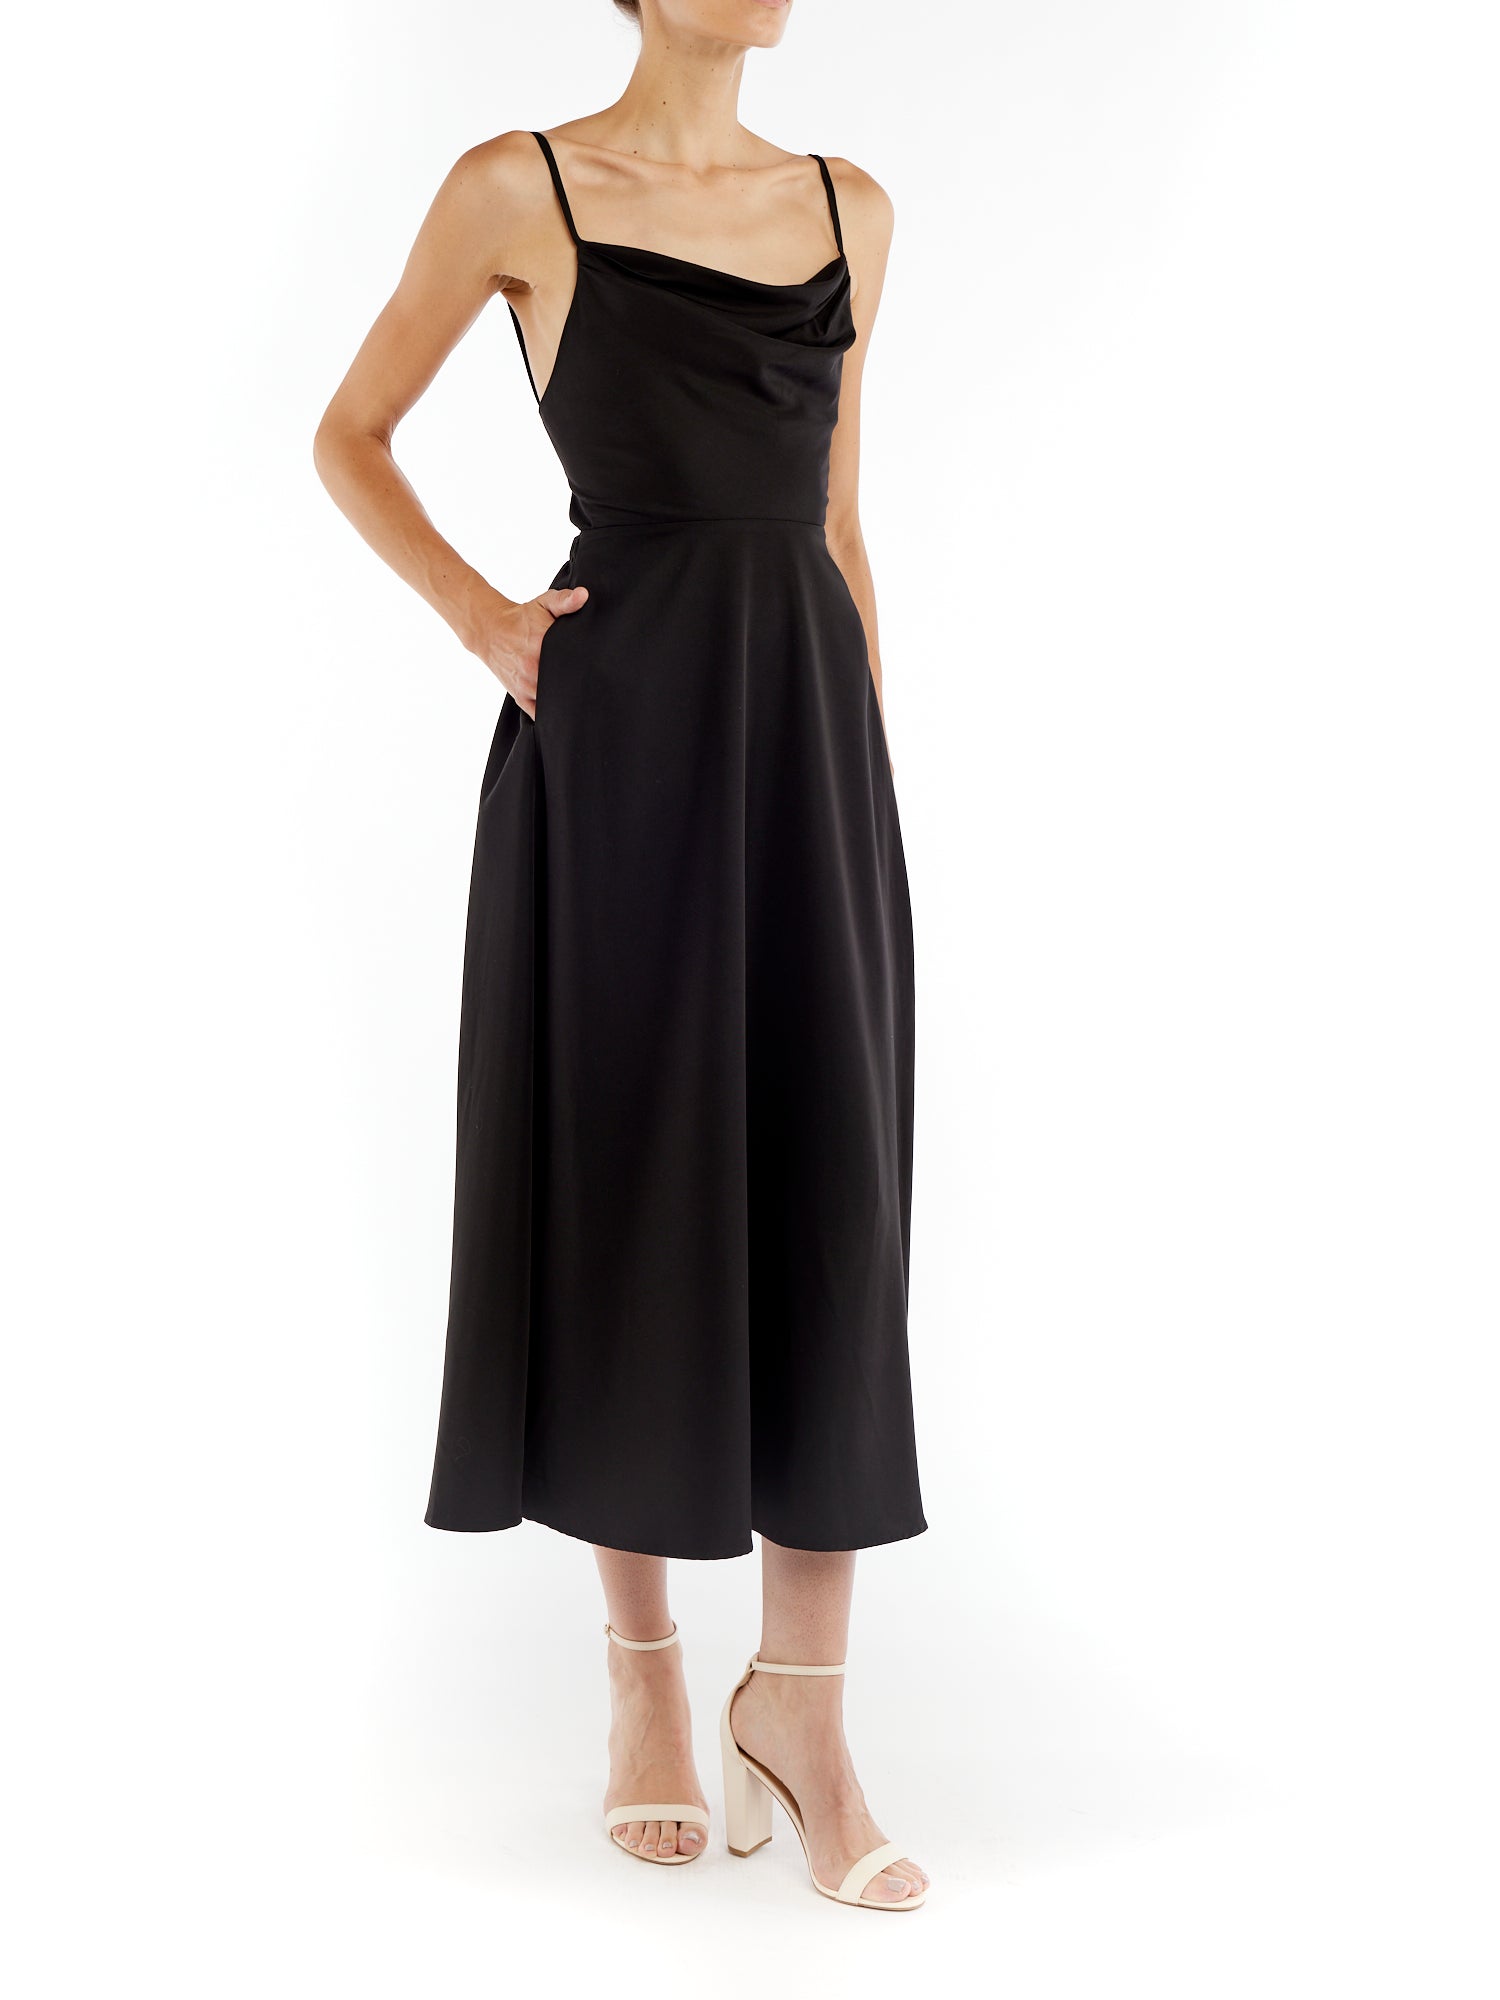 cowl neck dress with adjustable straps, side pockets, ankle length and open tie back in black